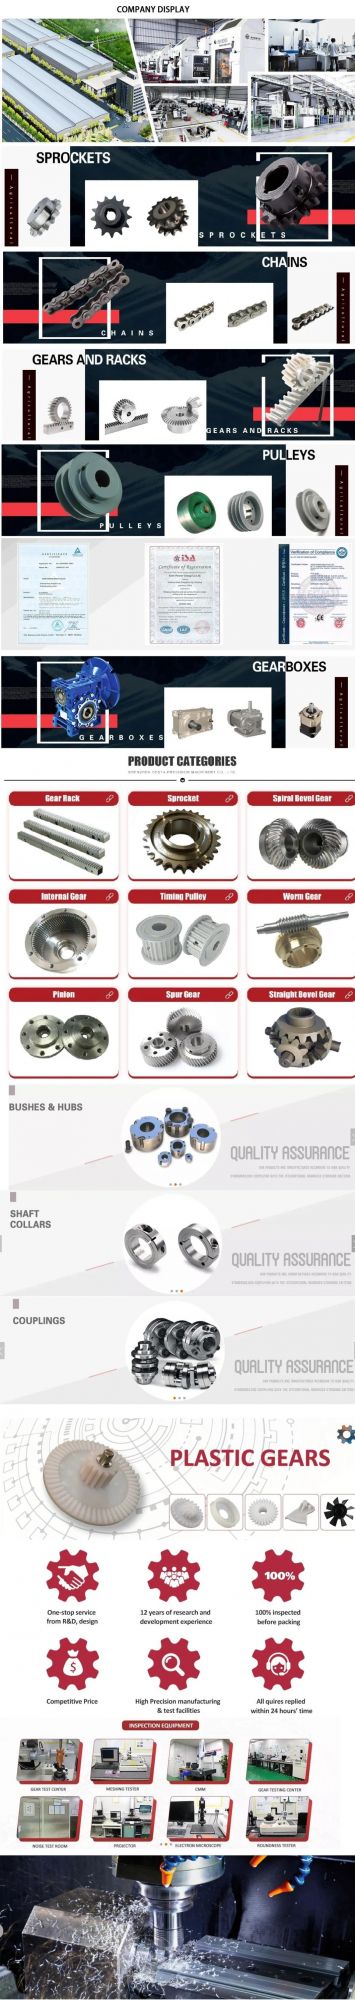 Bearing Needle Puller Extractor Slewing Skateboard Bearings Thrust Balls Thrust Clutch Ceramic Rod End Roller Manufacturing Flange Spherical Coupling